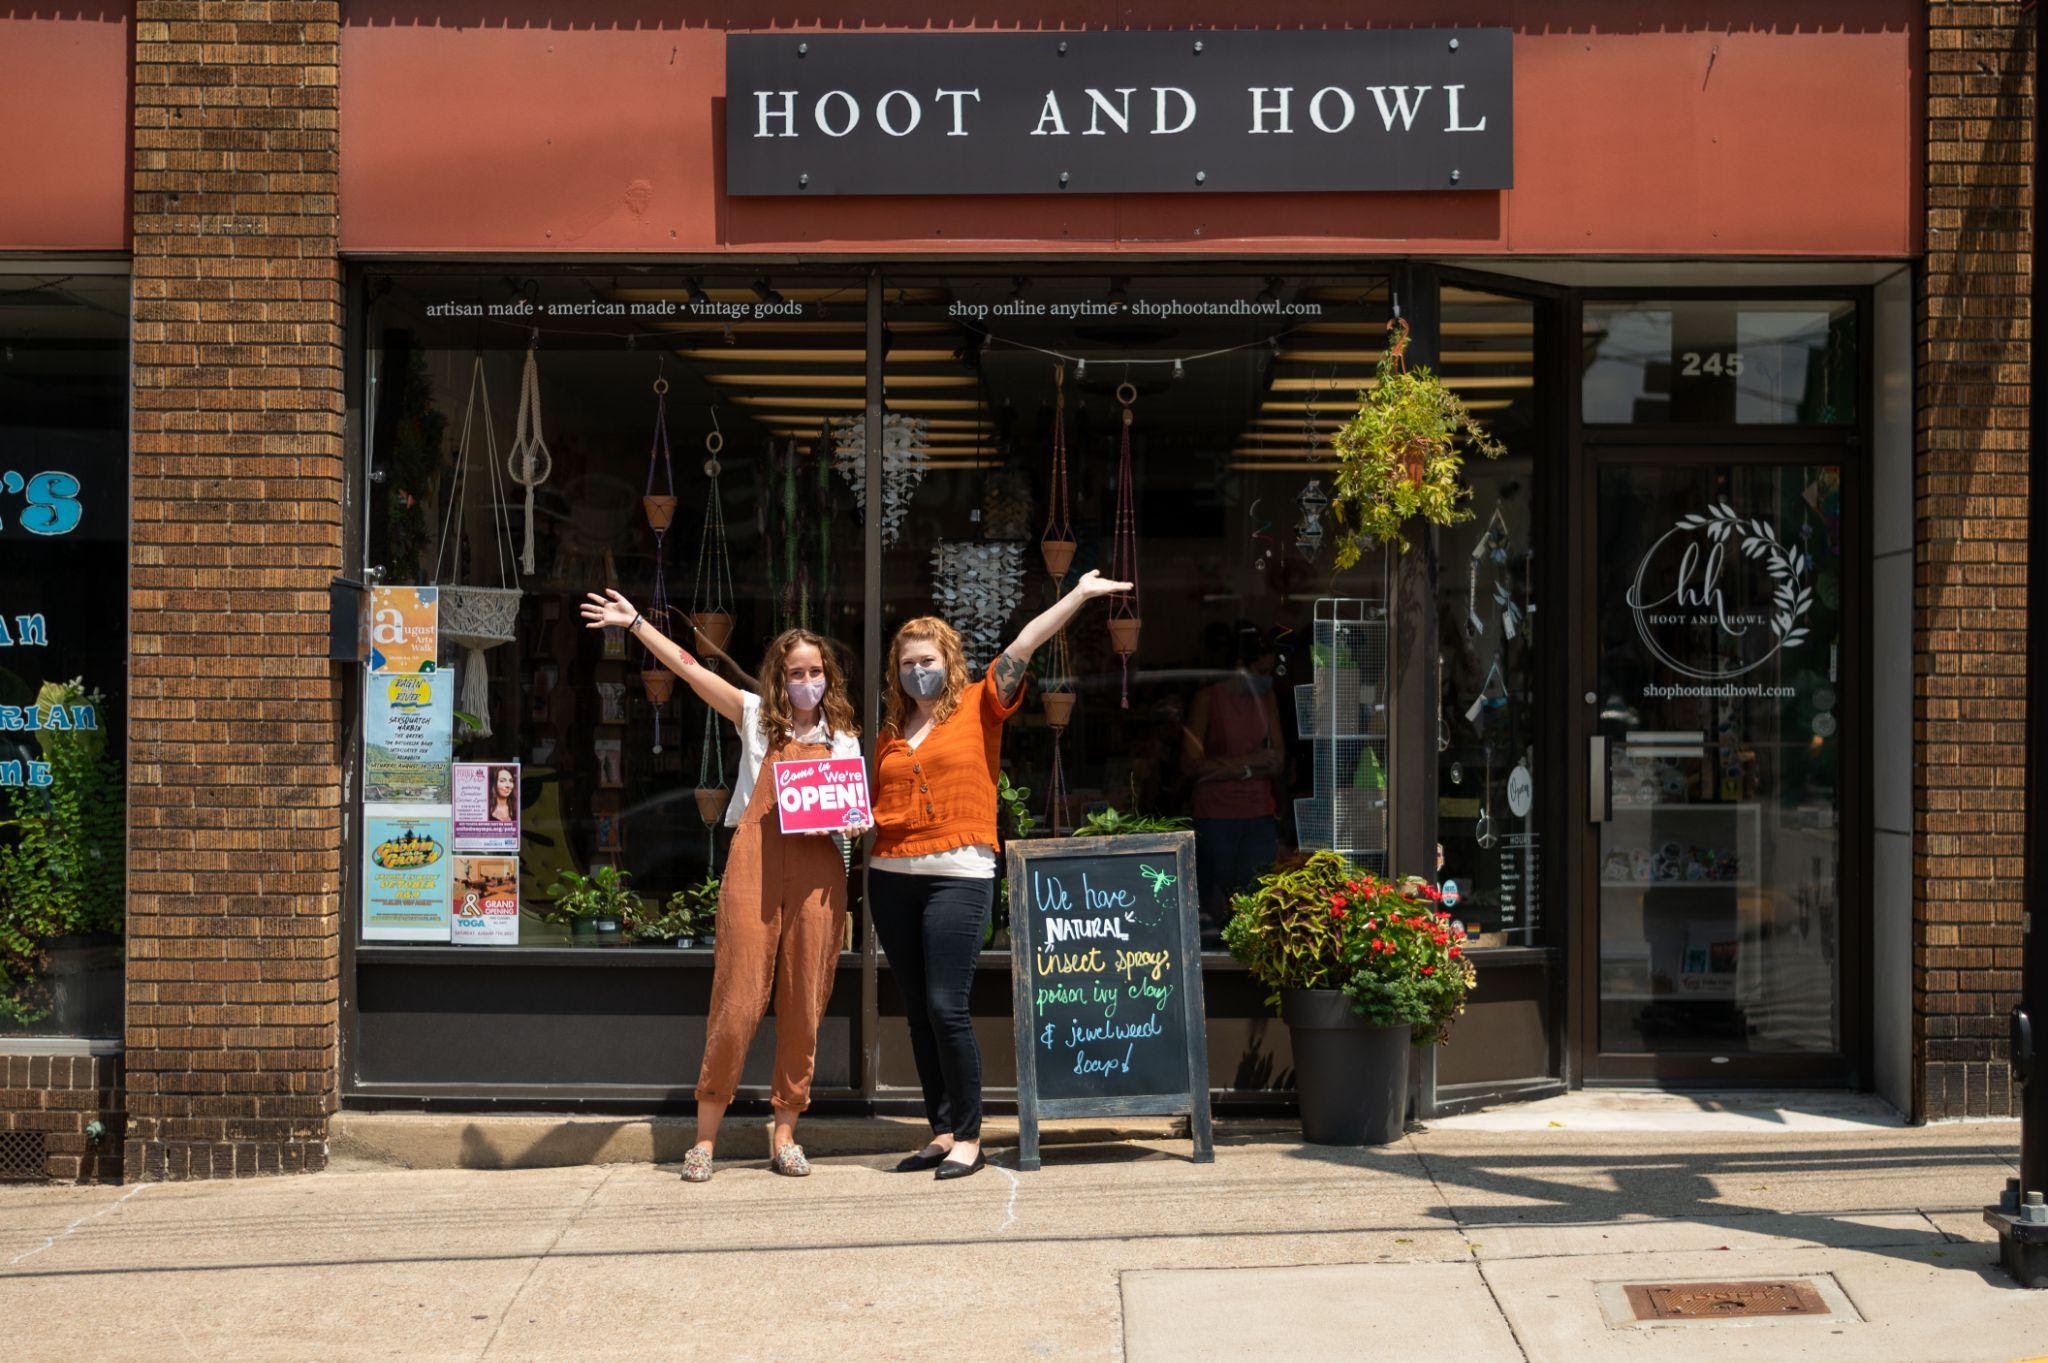 Hoot and Howl: Come in. We’re open!